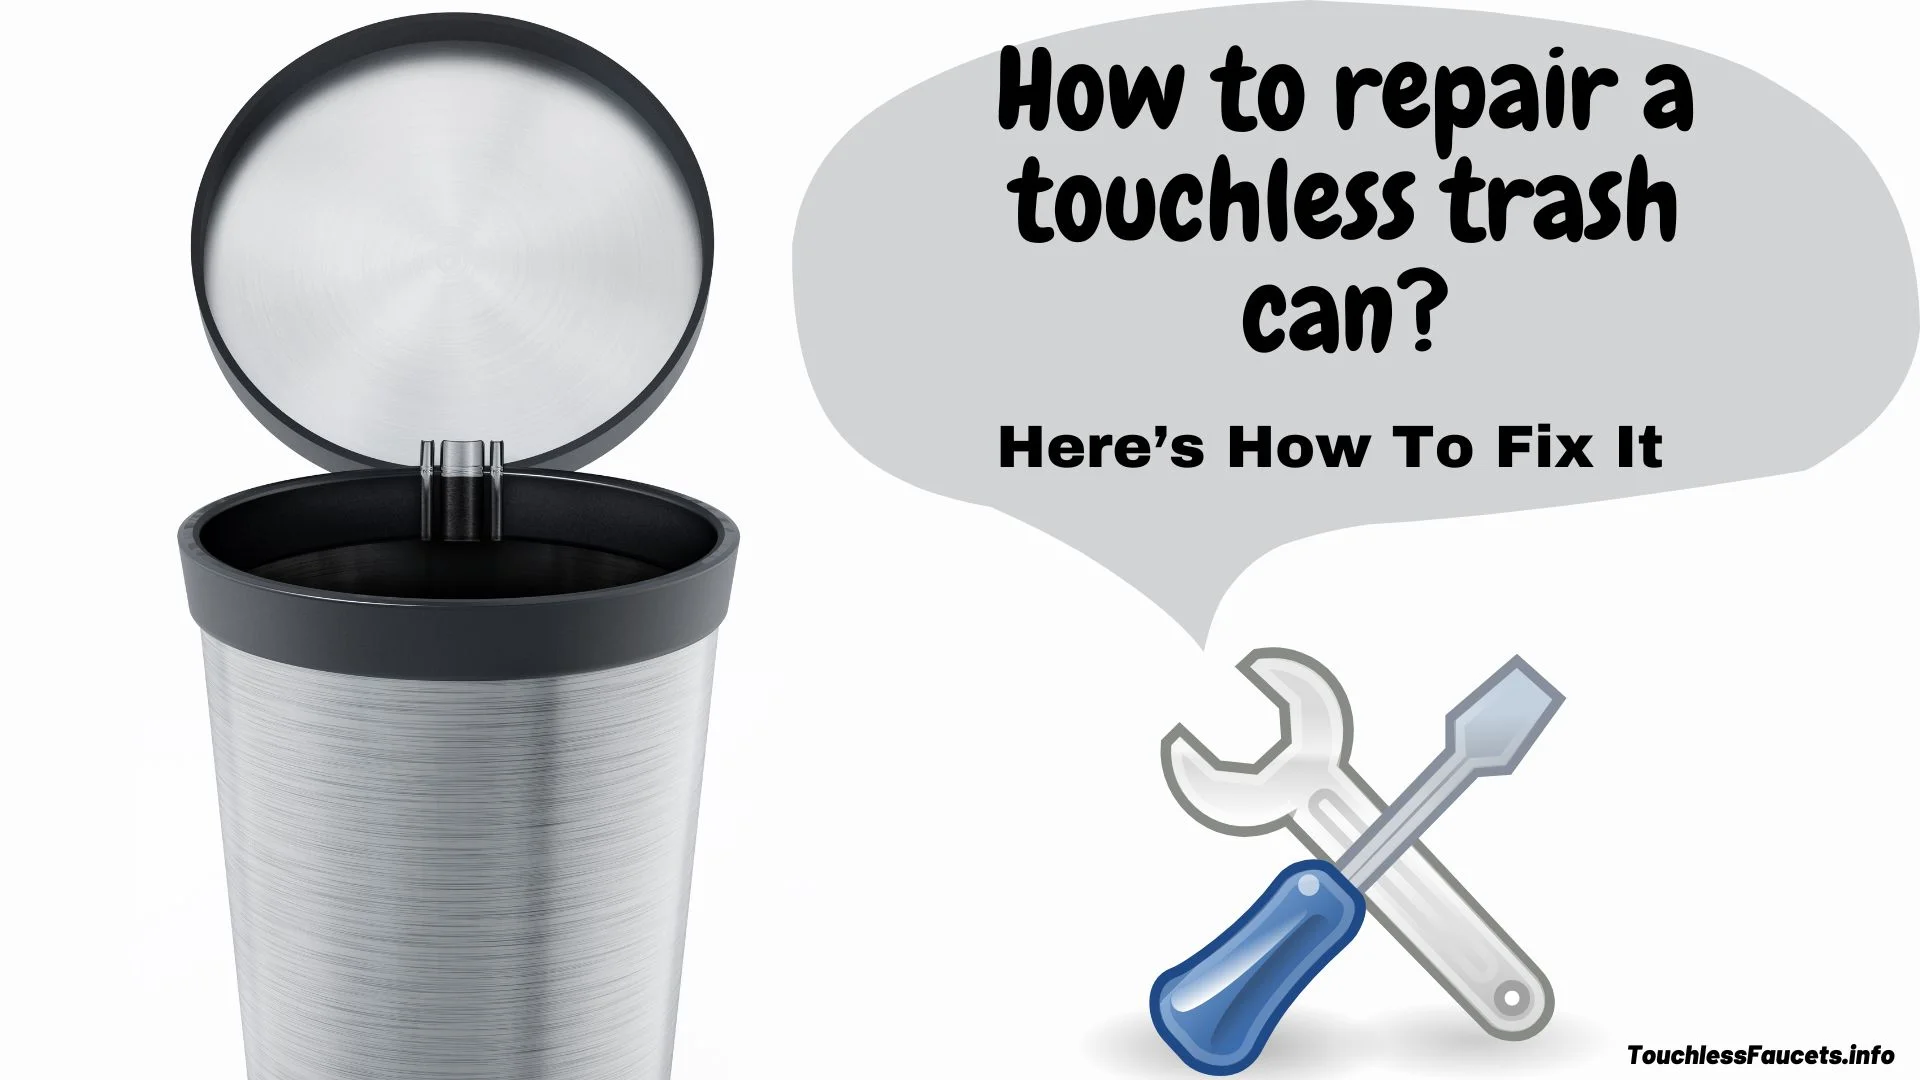 How to repair a touchless trash can